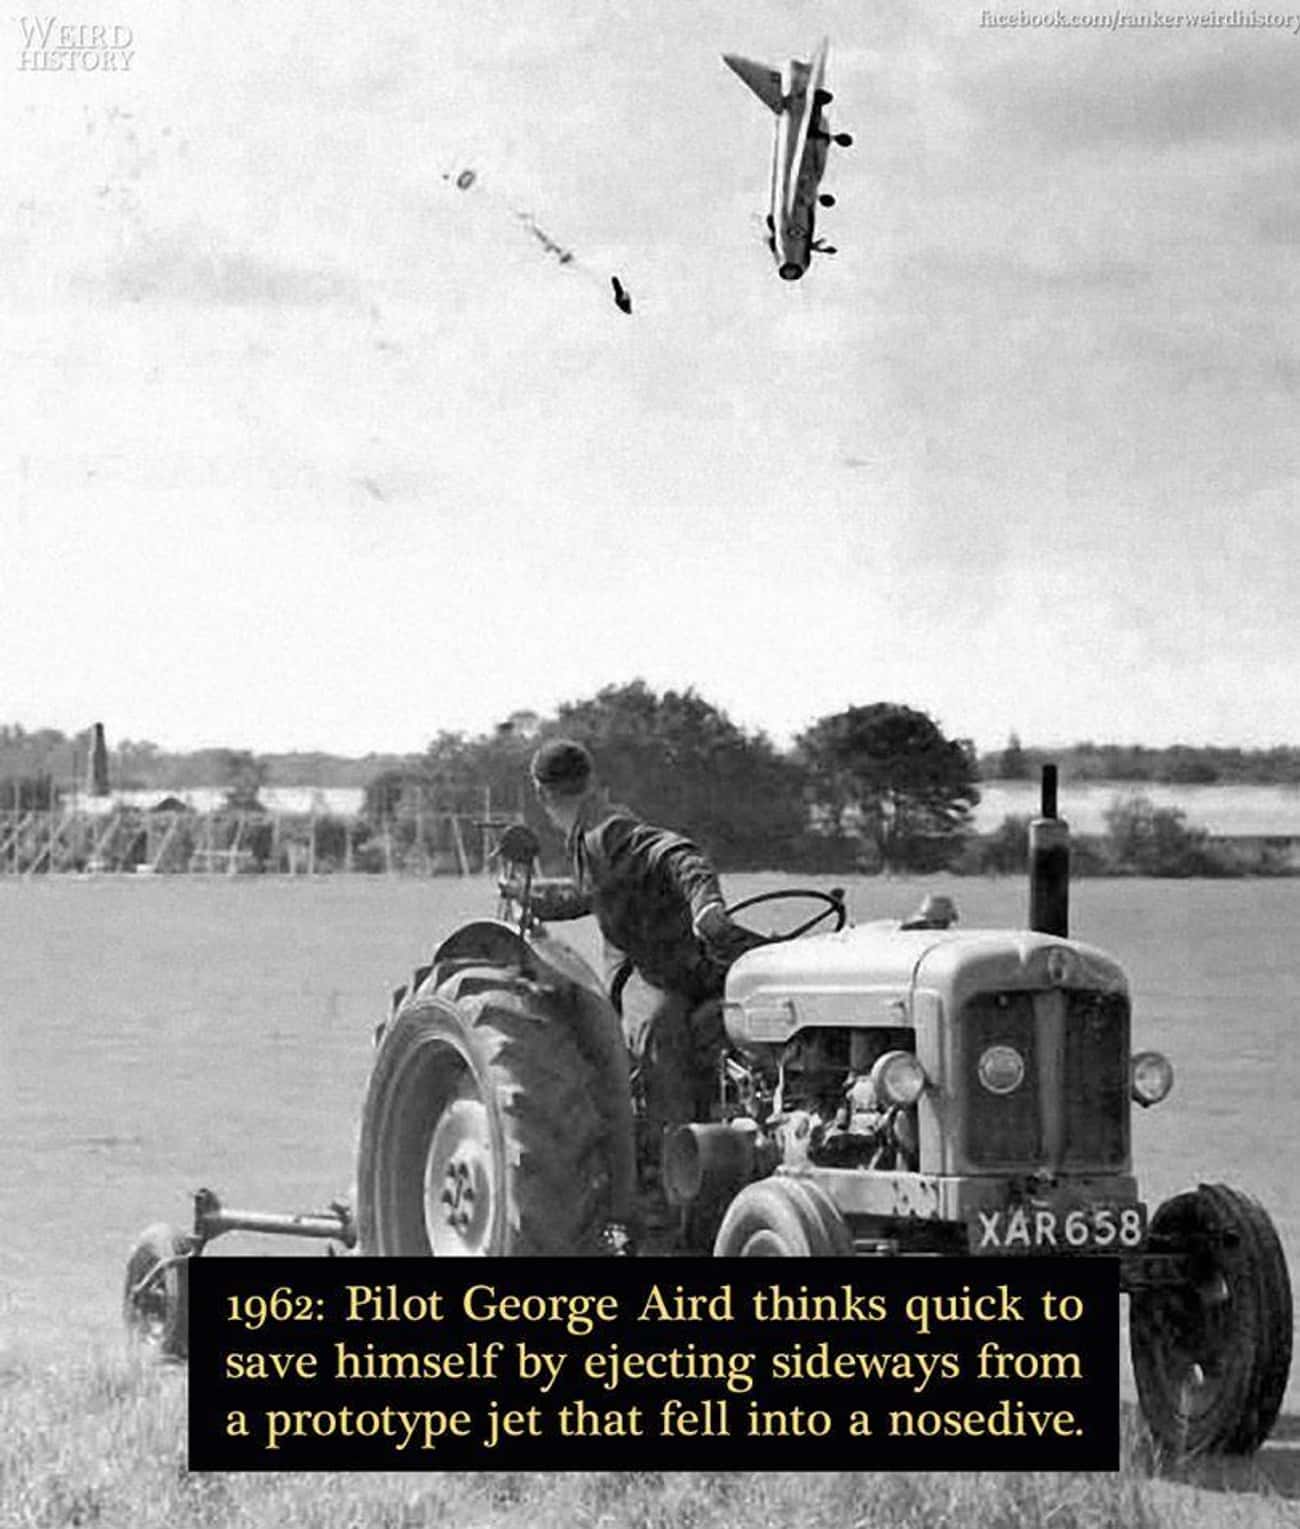 1962: A Pilot Ejects Himself From A Prototype